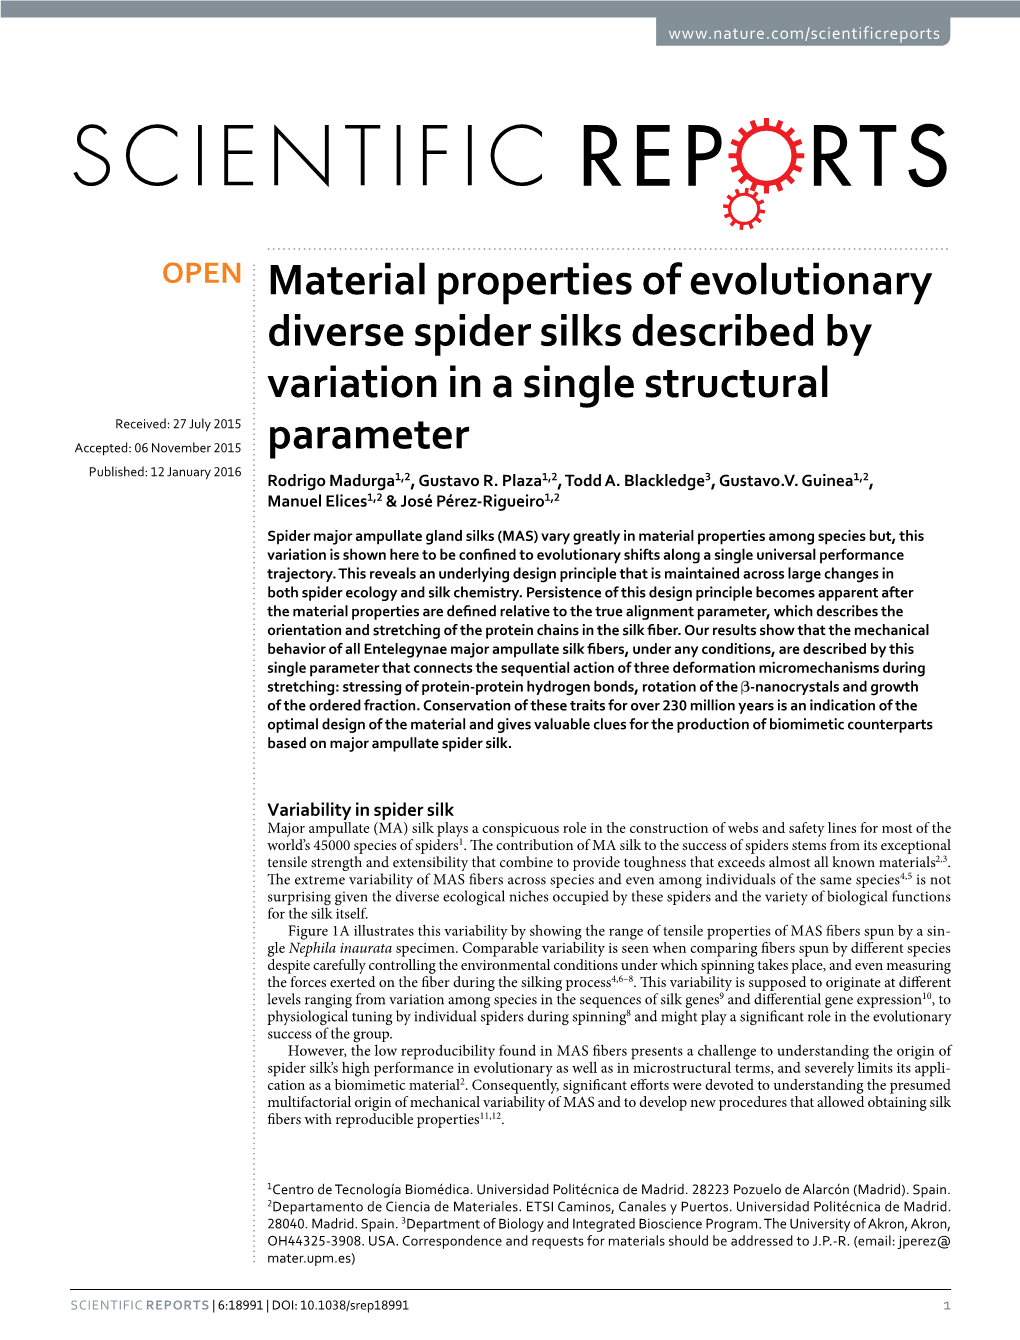 Material Properties of Evolutionary Diverse Spider Silks Described By